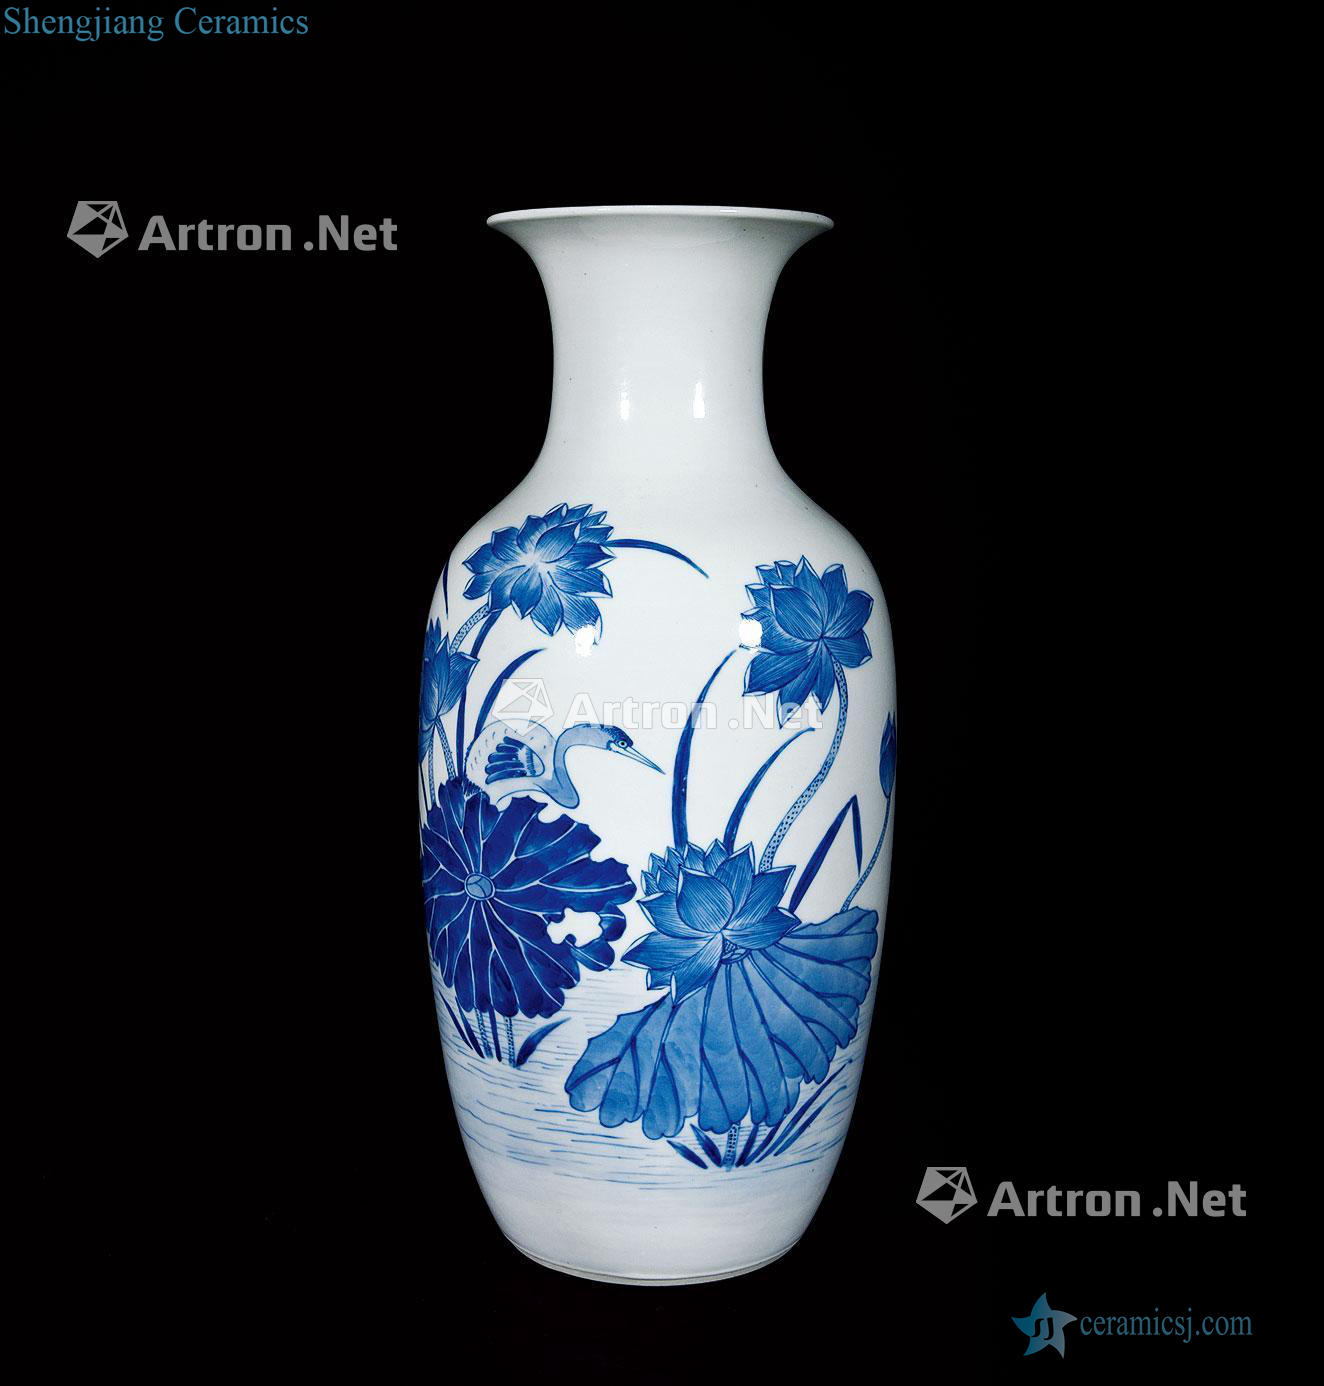 Qing dynasty blue and white all the way even the bottle